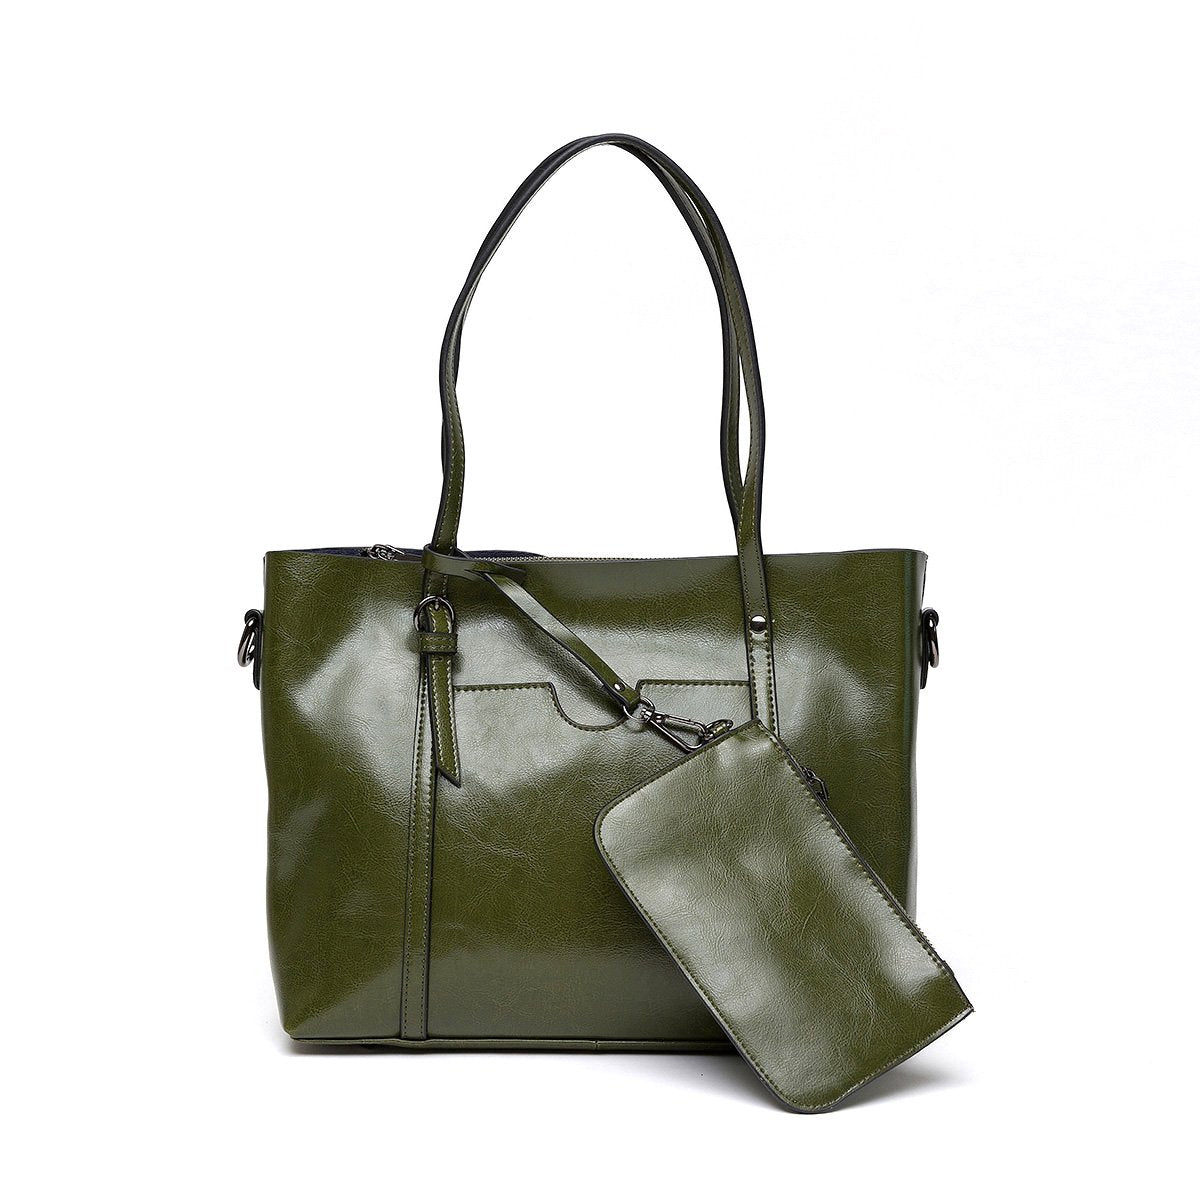 Provence Leather Bag